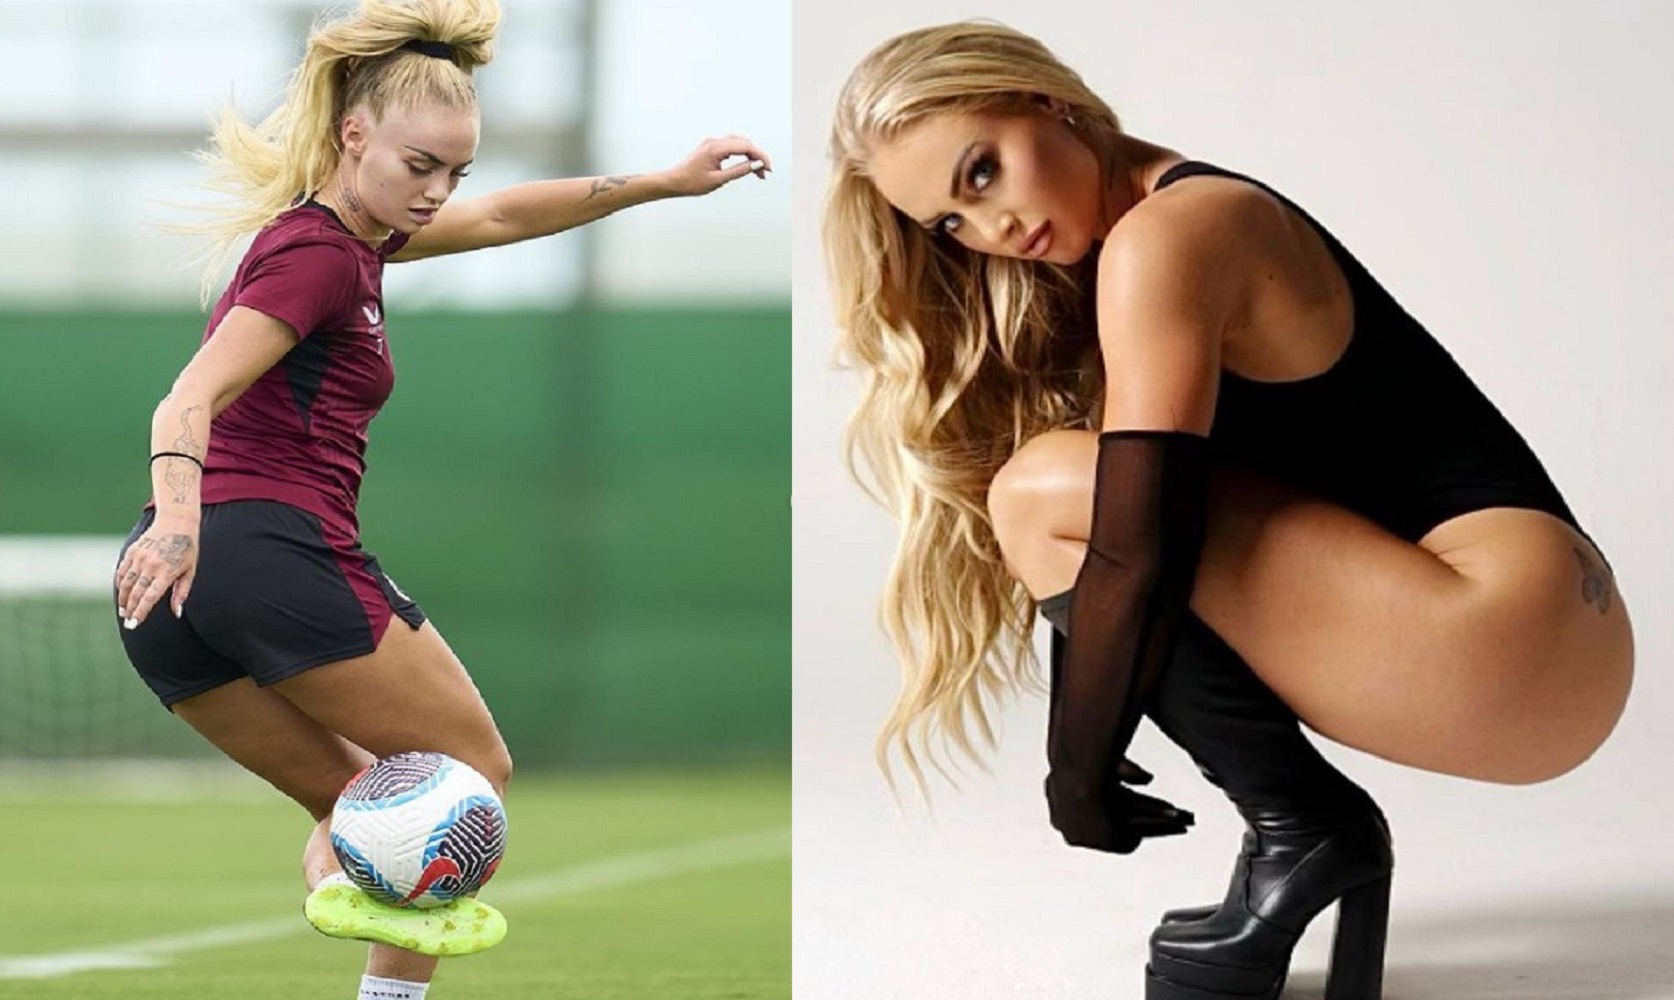 Alisha Lehmann: The World’s Most Popular Soccer Player Selling Exclusive Content Online